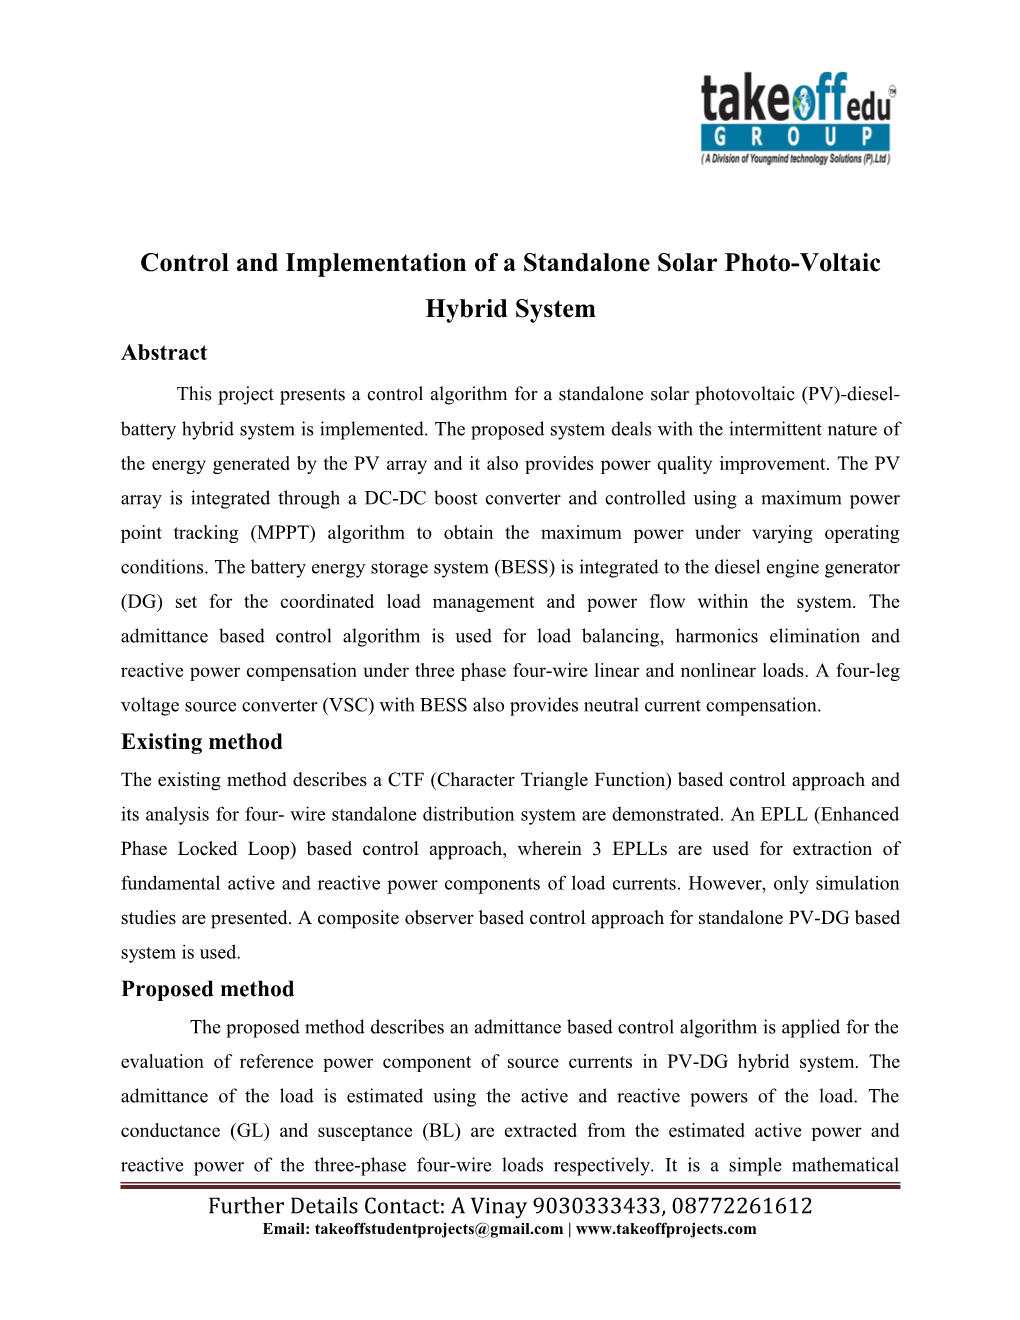 Control and Implementation of a Standalone Solar Photo-Voltaic Hybrid System